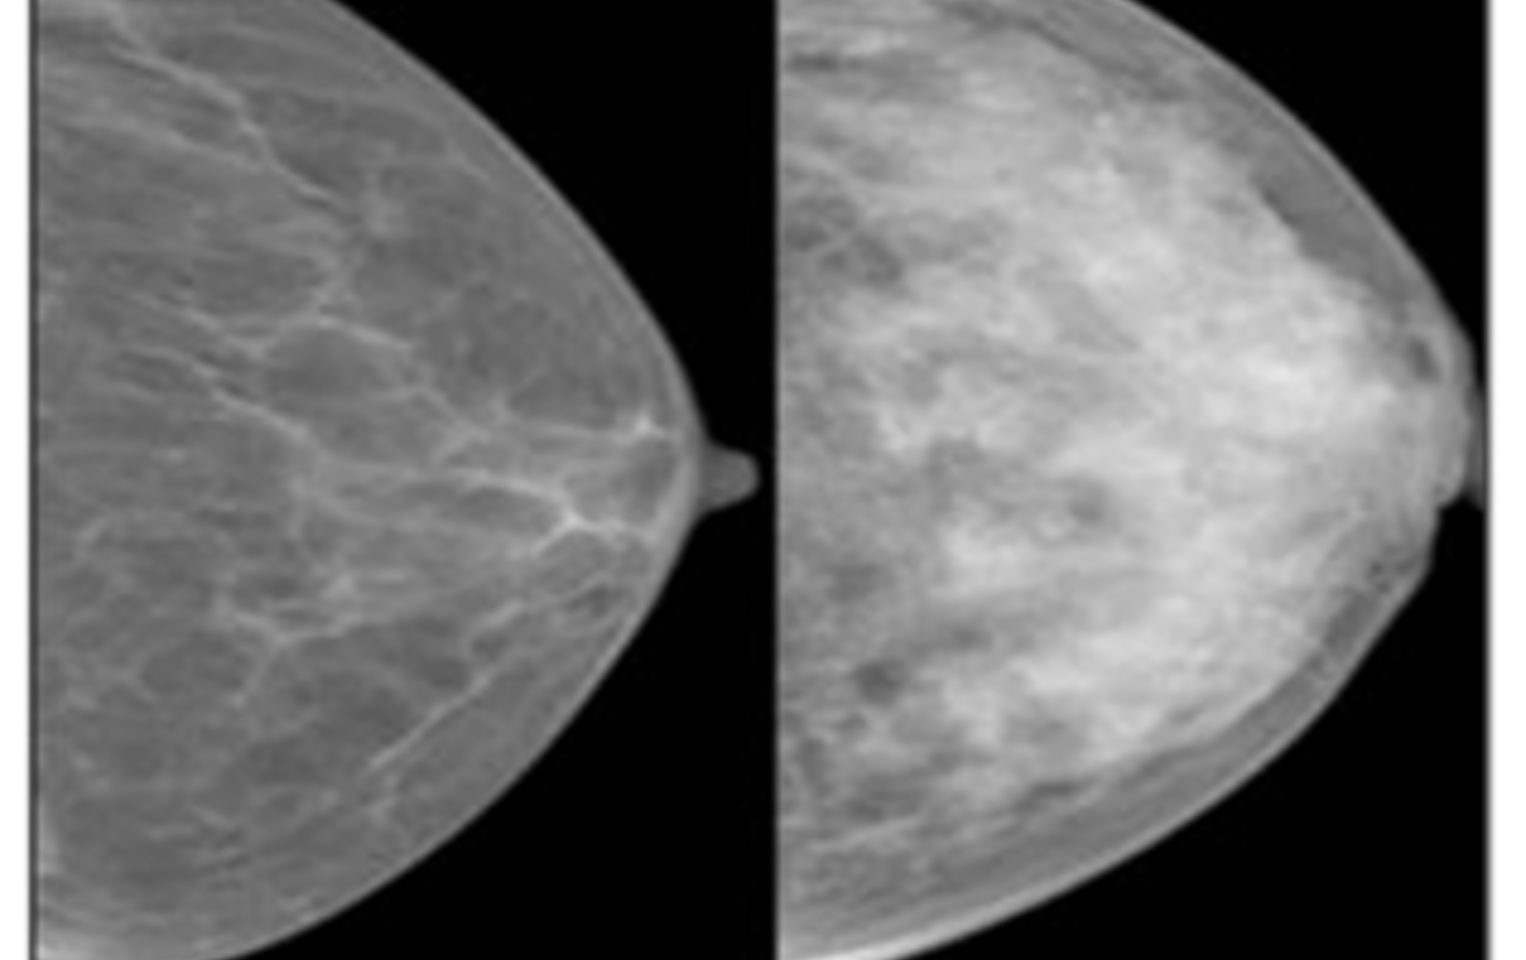 Image showing two mammograms. One is a darker colour for the fatty breast, the other is a lighter colour for the dense breast 